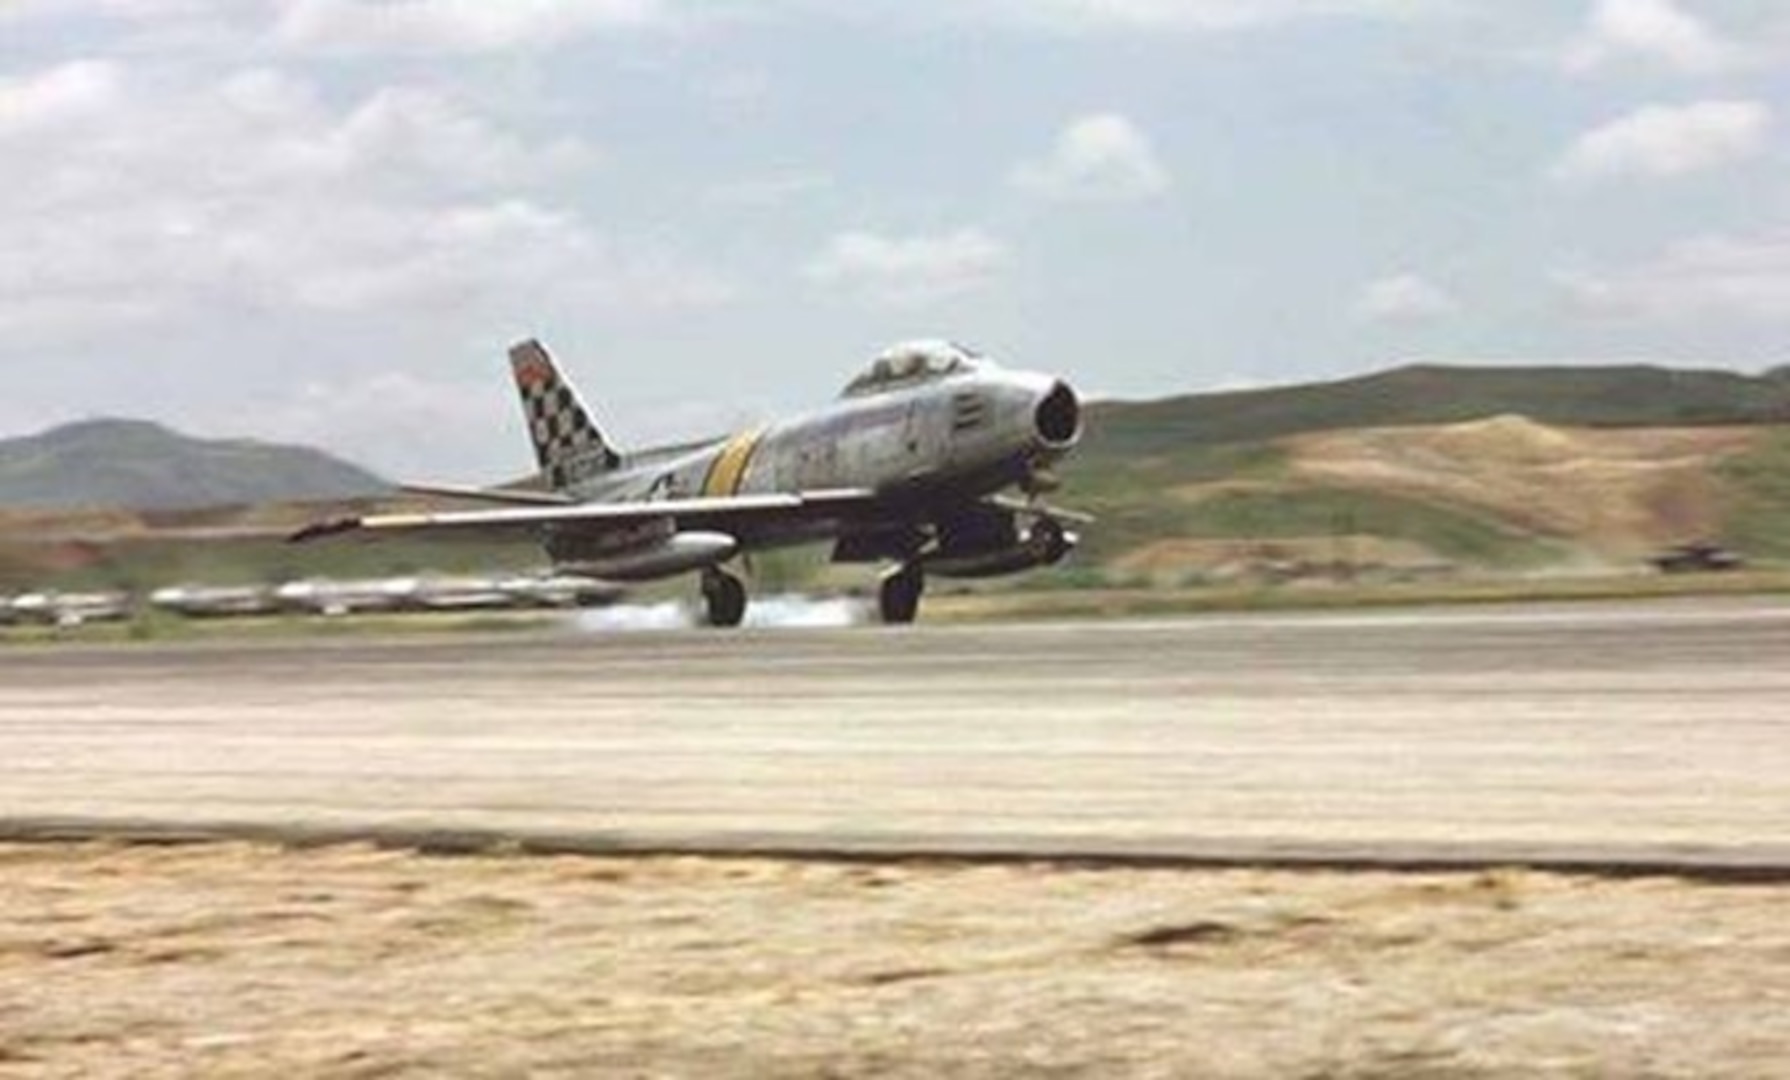 A U.S. Air Force F-86 Sabre assigned to the 51st Fighter-Interceptor Wing lands at Suwon Air Base, Republic of Korea circa. June 1953. (Courtesy photo)